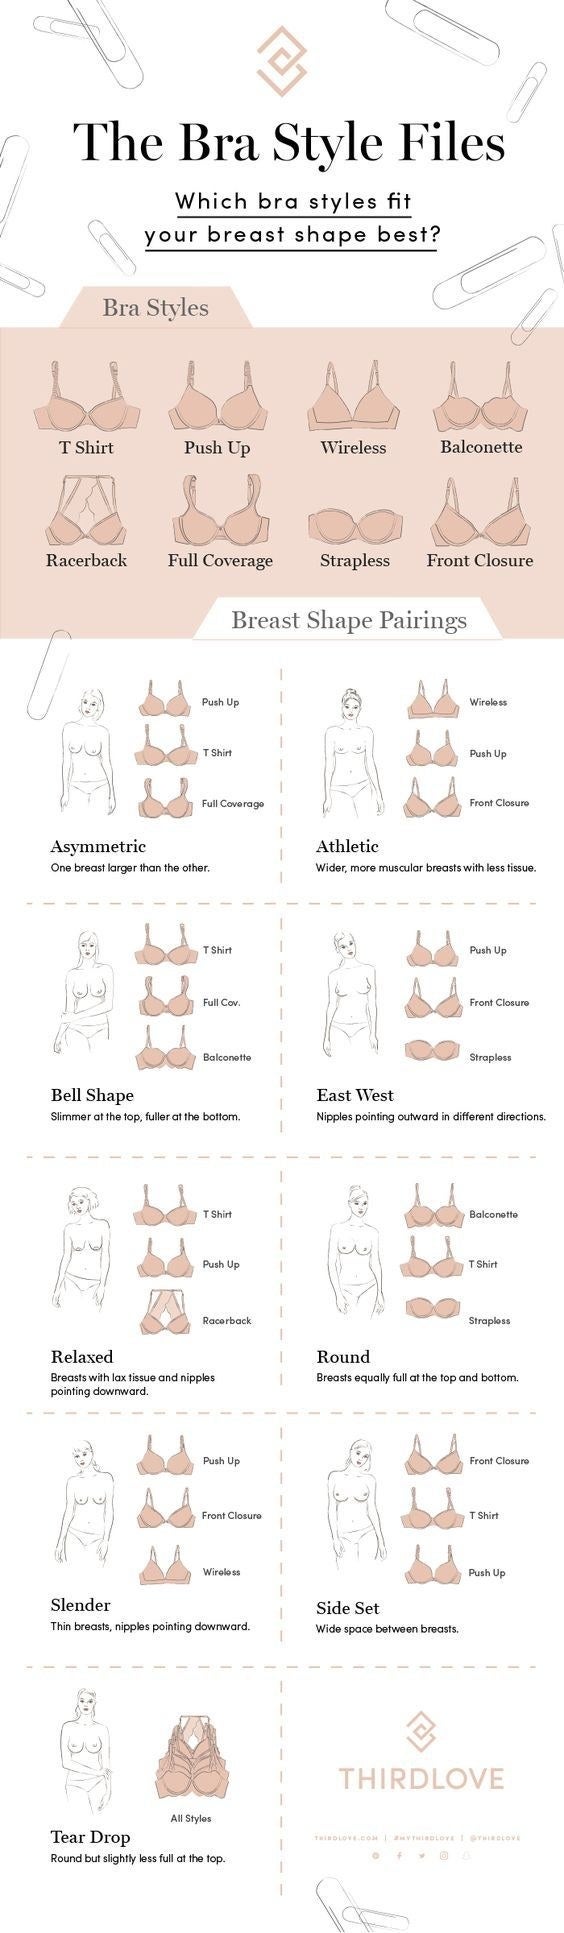 The best bra styles for different breast shapes, according to an